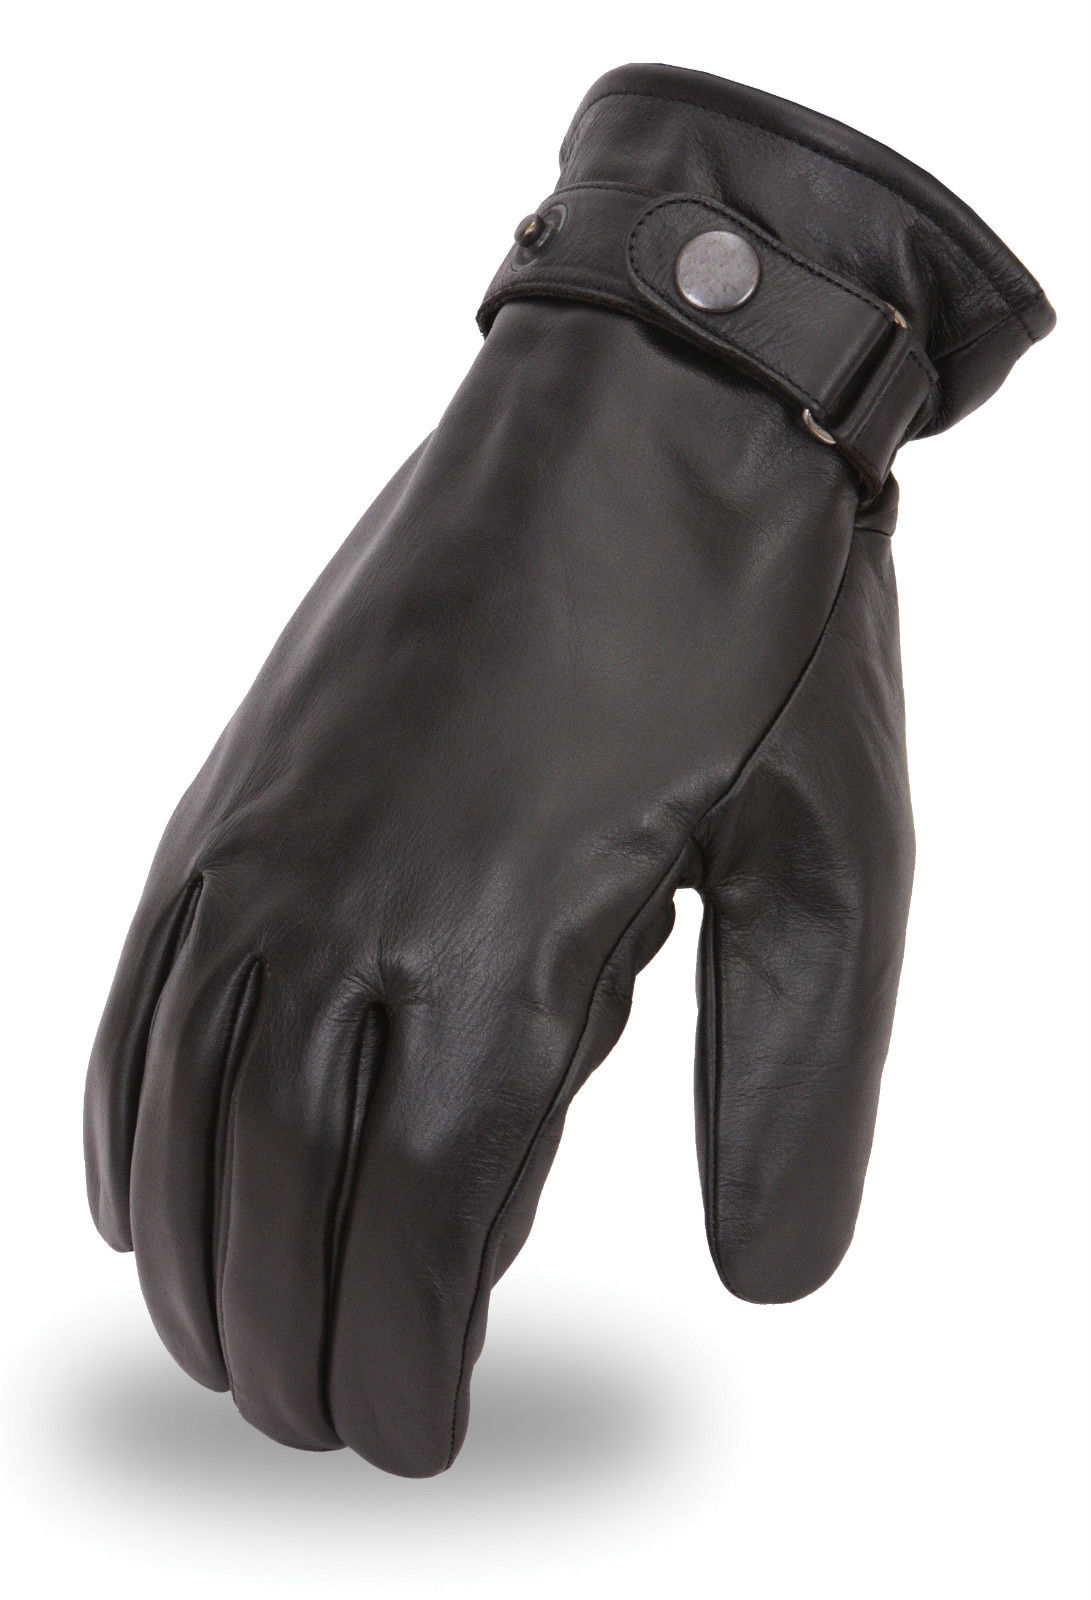 Men's Military Style Leather Motorcycle Riding Gloves w/ Thermal Liner FI115GL - image 1 of 3